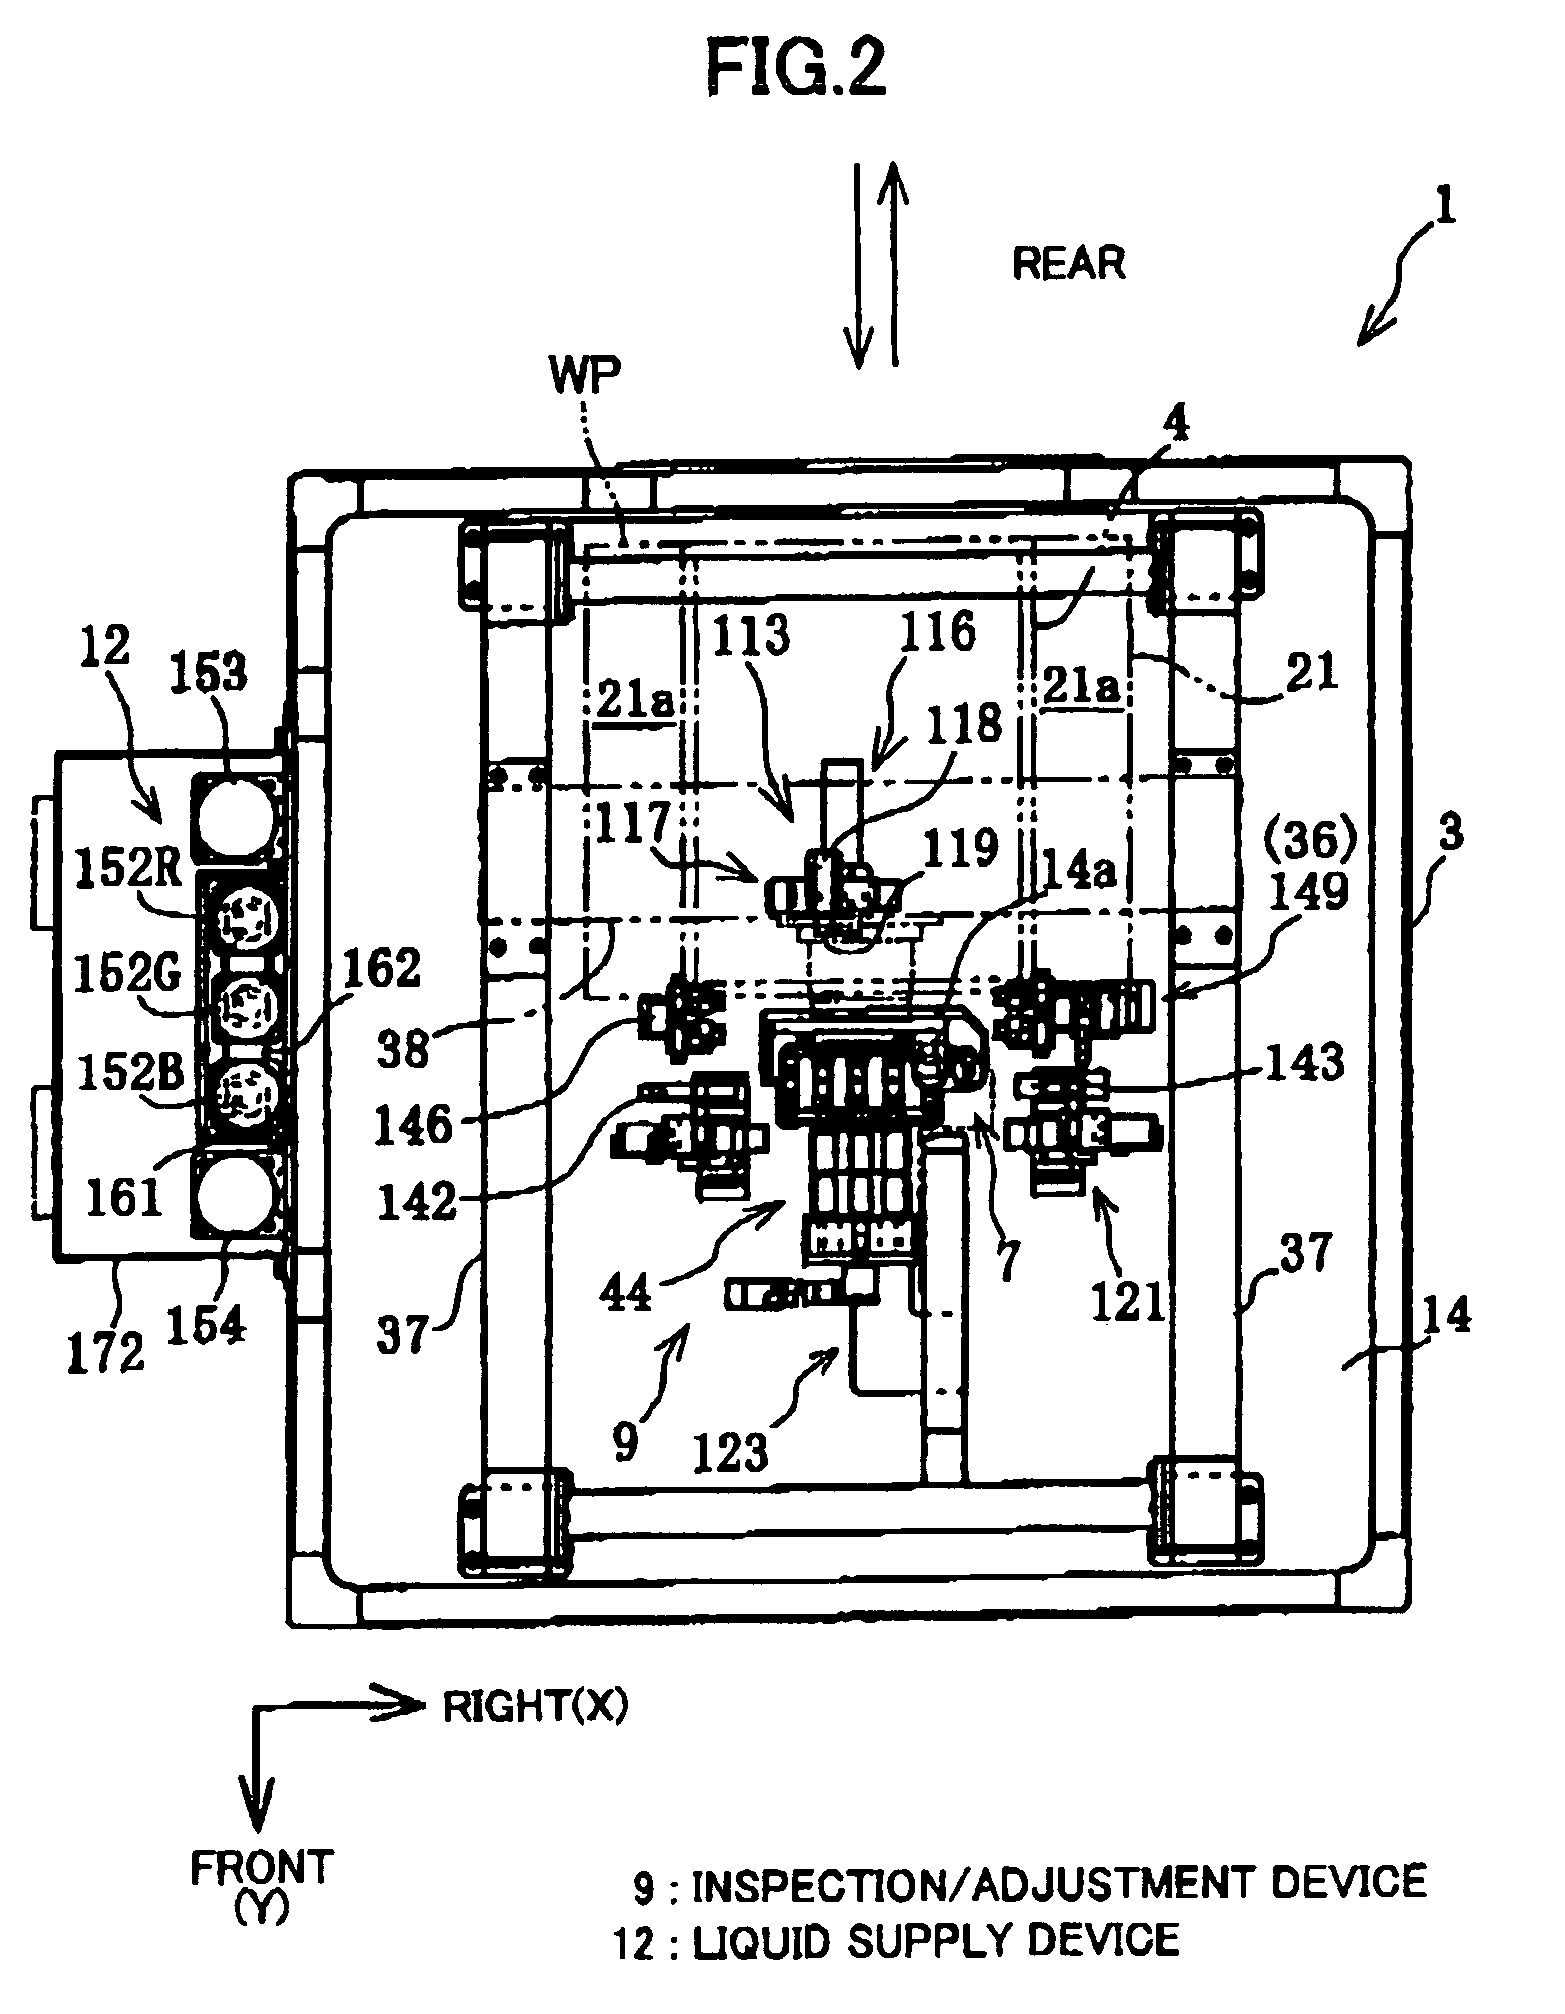 Nozzle head, nozzle head holder, and droplet jet patterning device